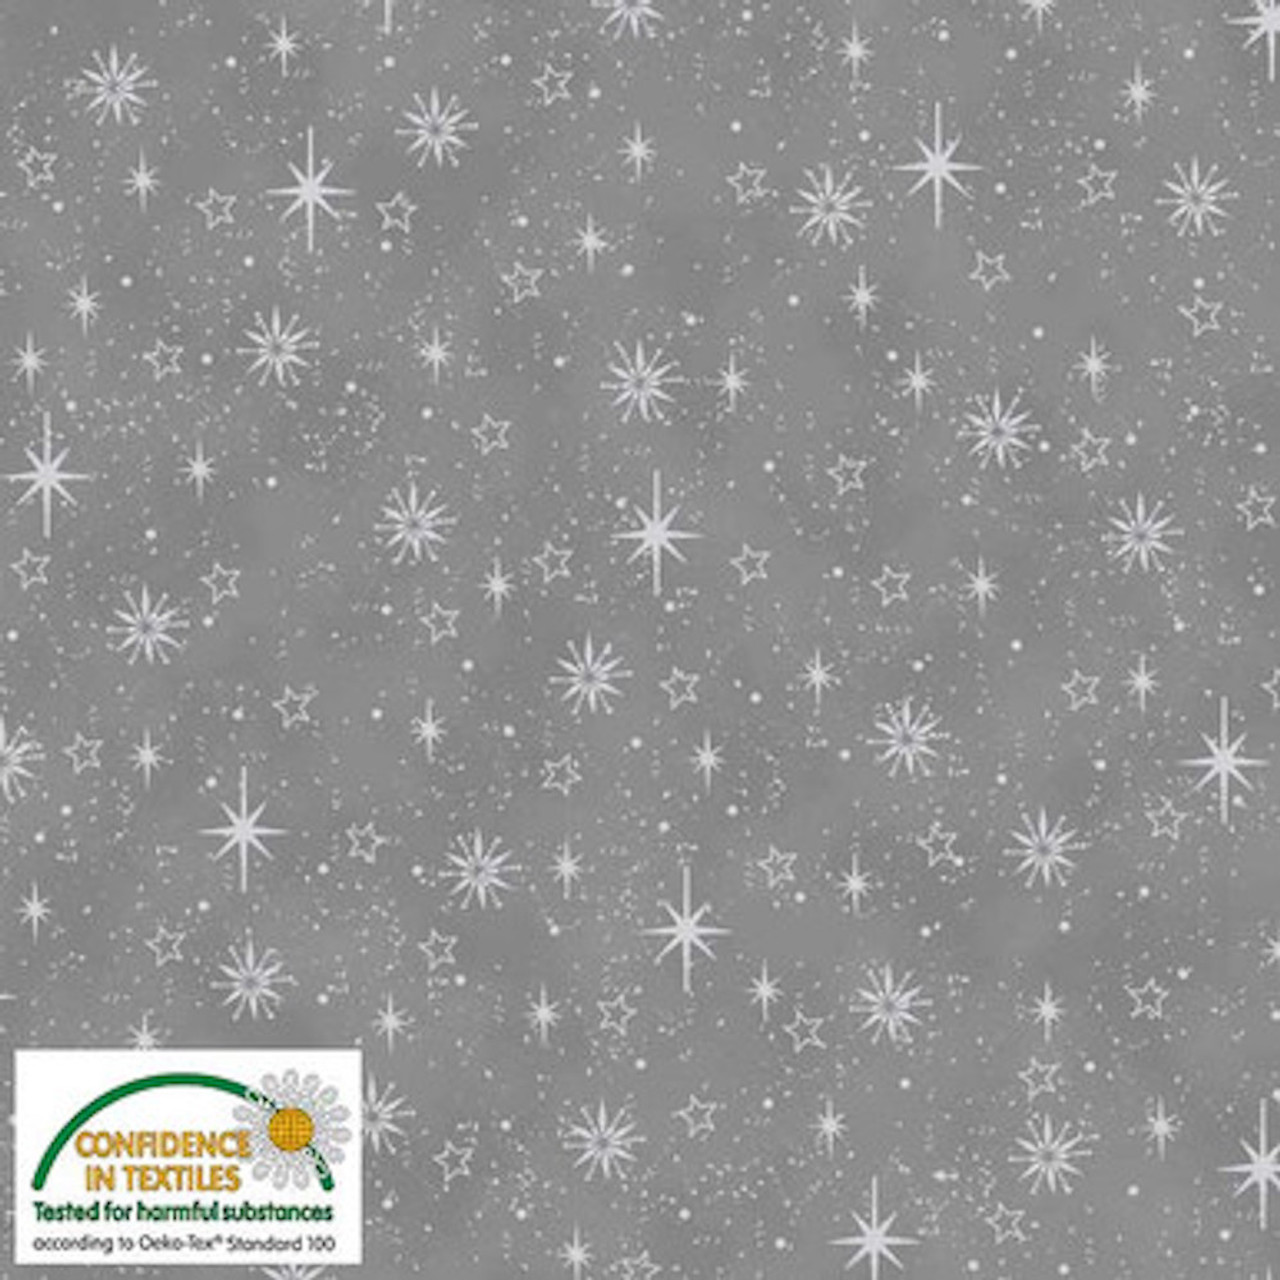 Stof Star Sprinkle Different Stars Grey Silver Cotton Fabric By The Yard